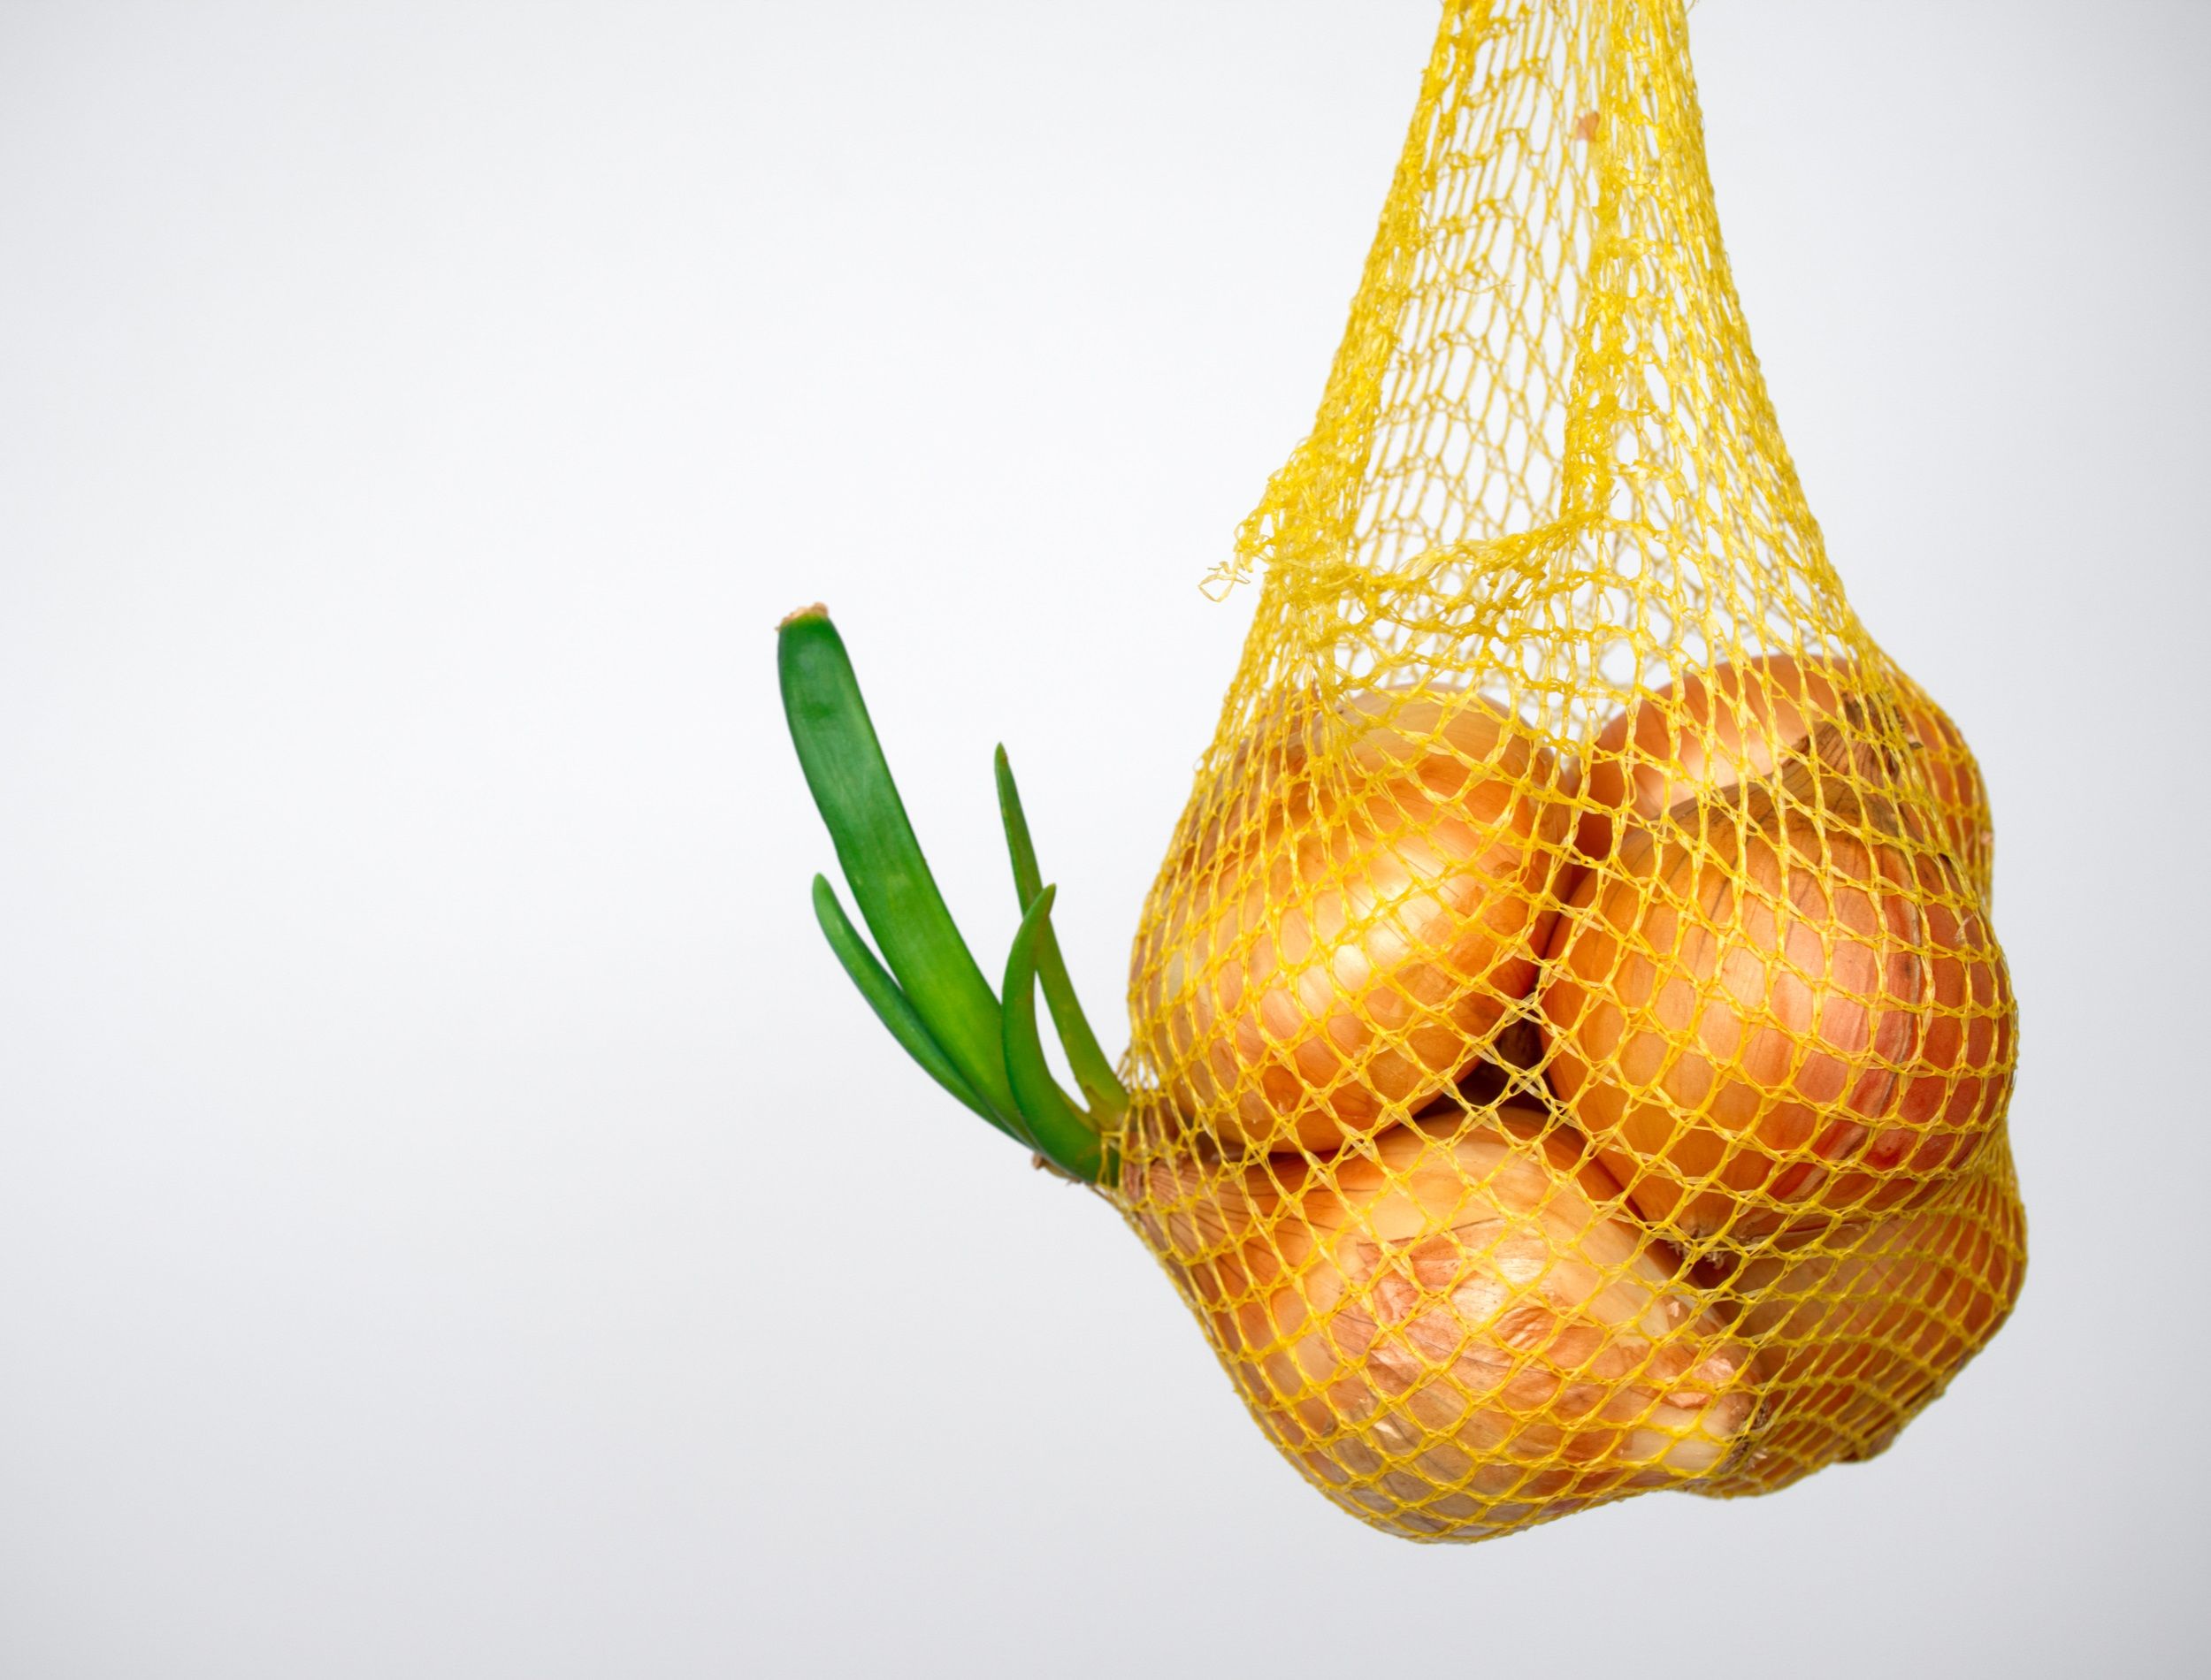 Onions sprouted in yellow hanging mesh bag.